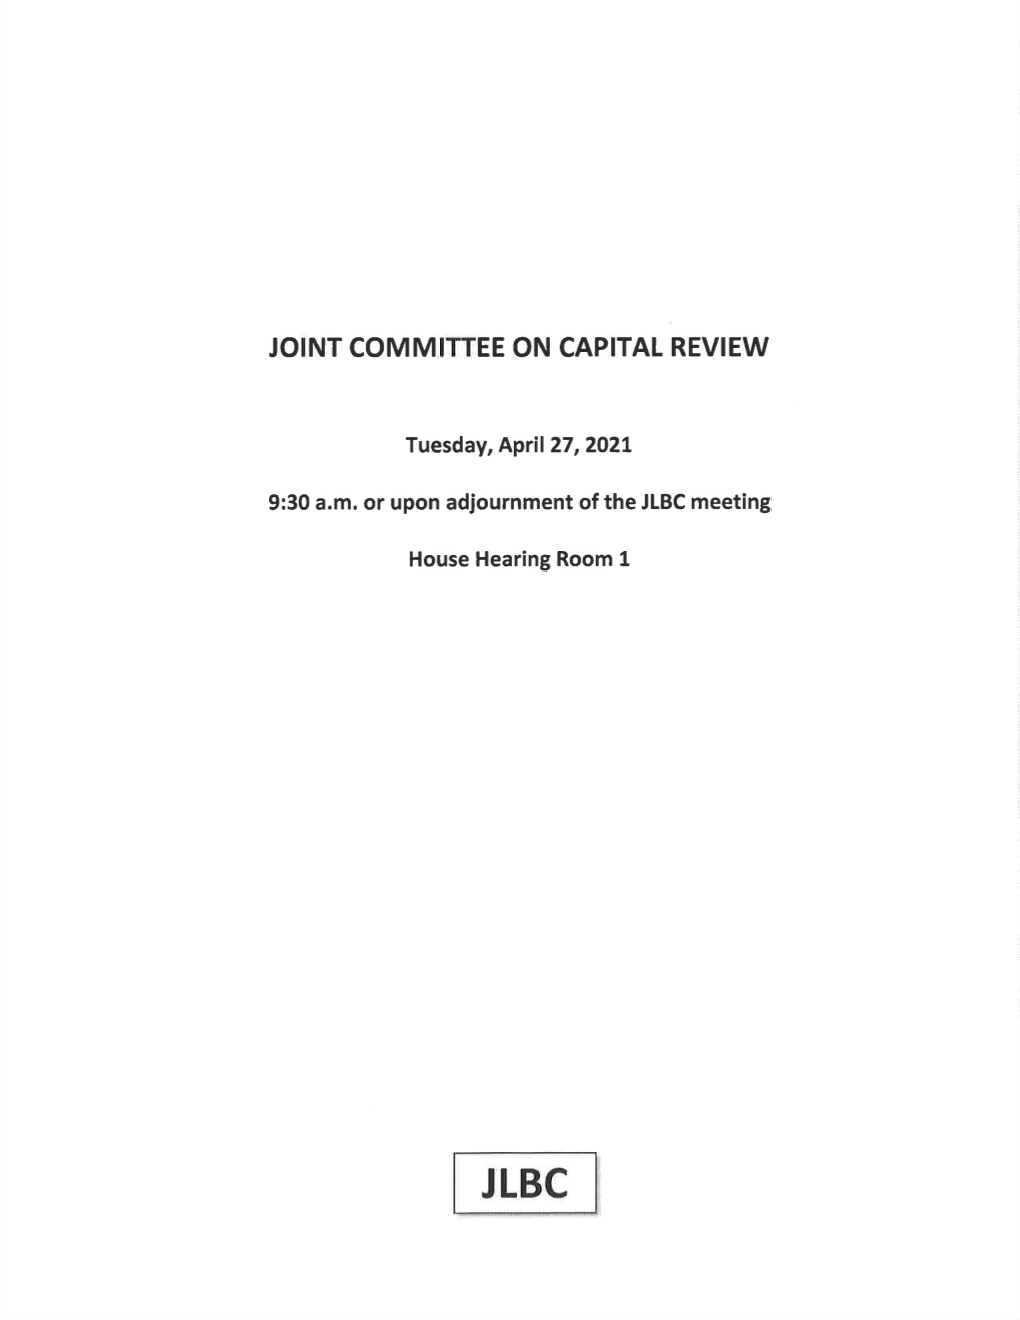 Joint Committee on Capital Review Meeting